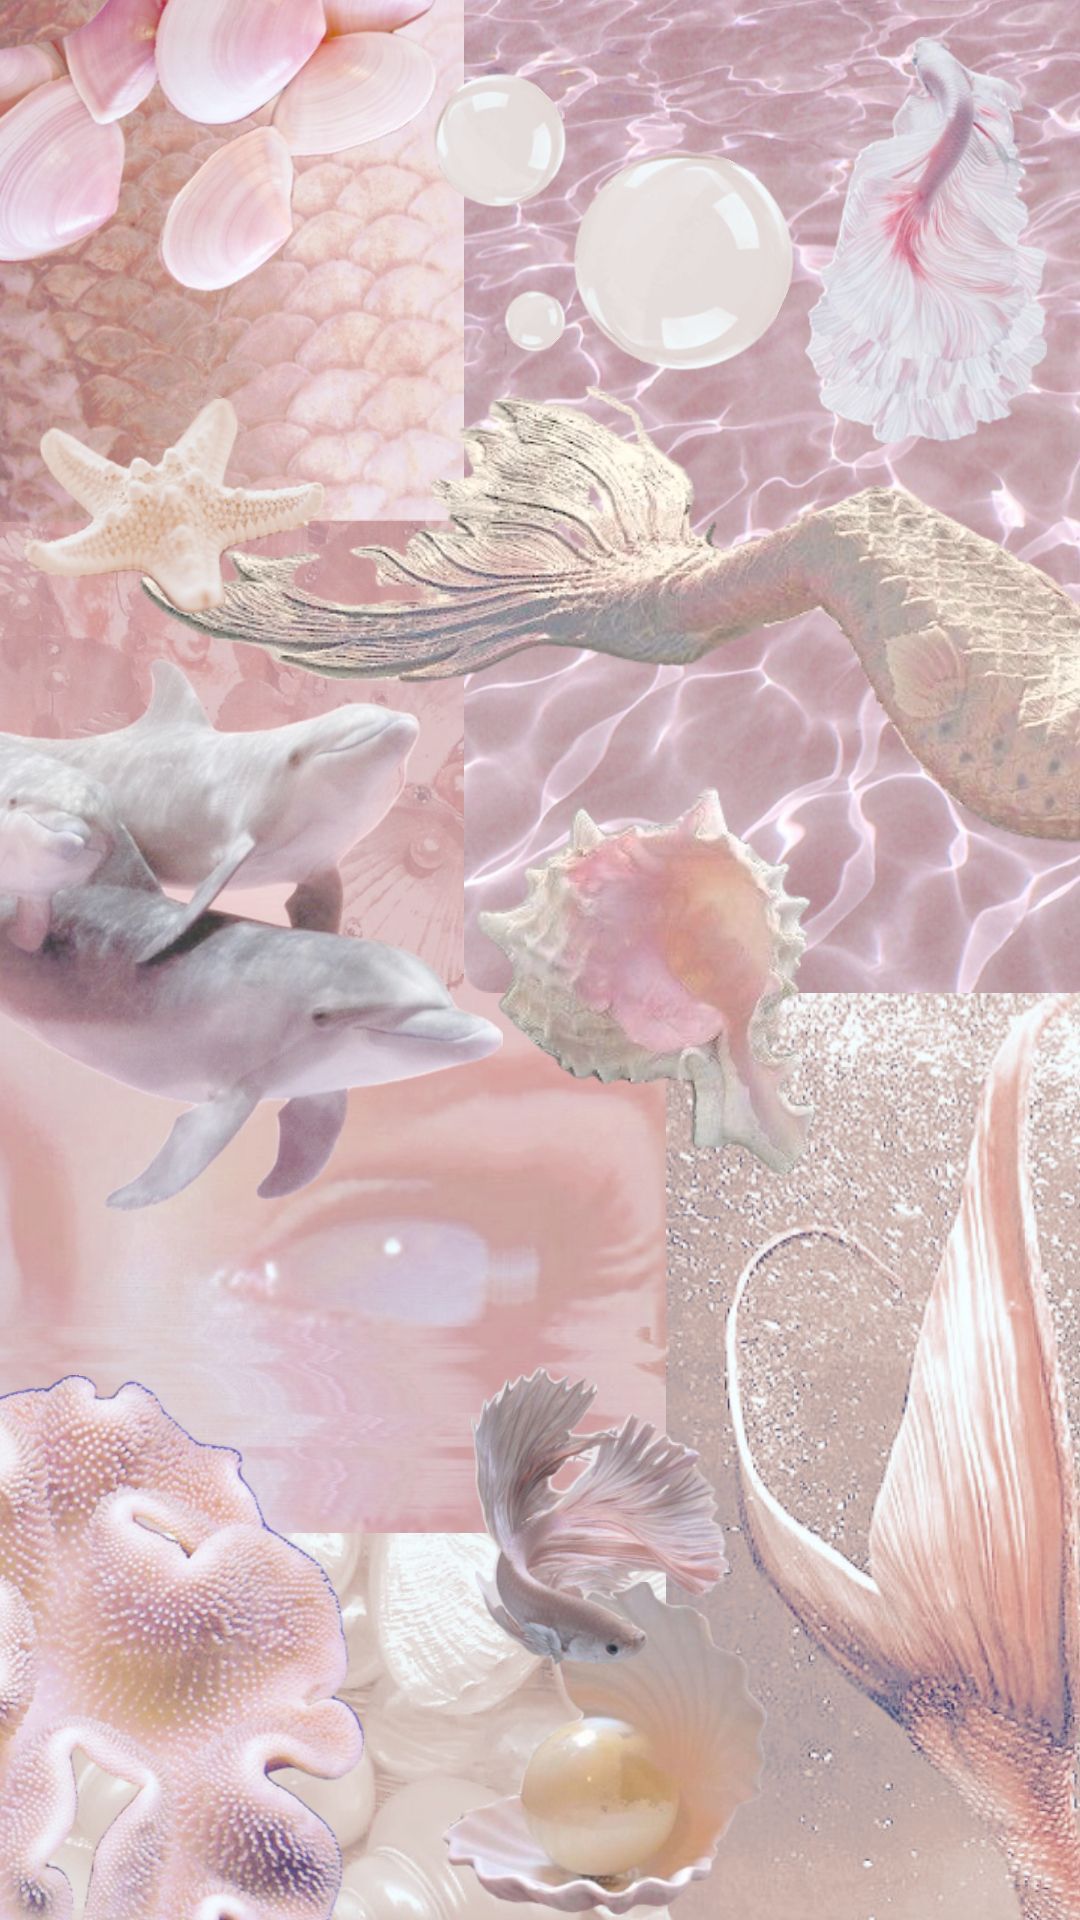 IPhone wallpaper of a pink aesthetic with a collage of dolphins, jellyfish, seashells, and mermaids - Mermaid